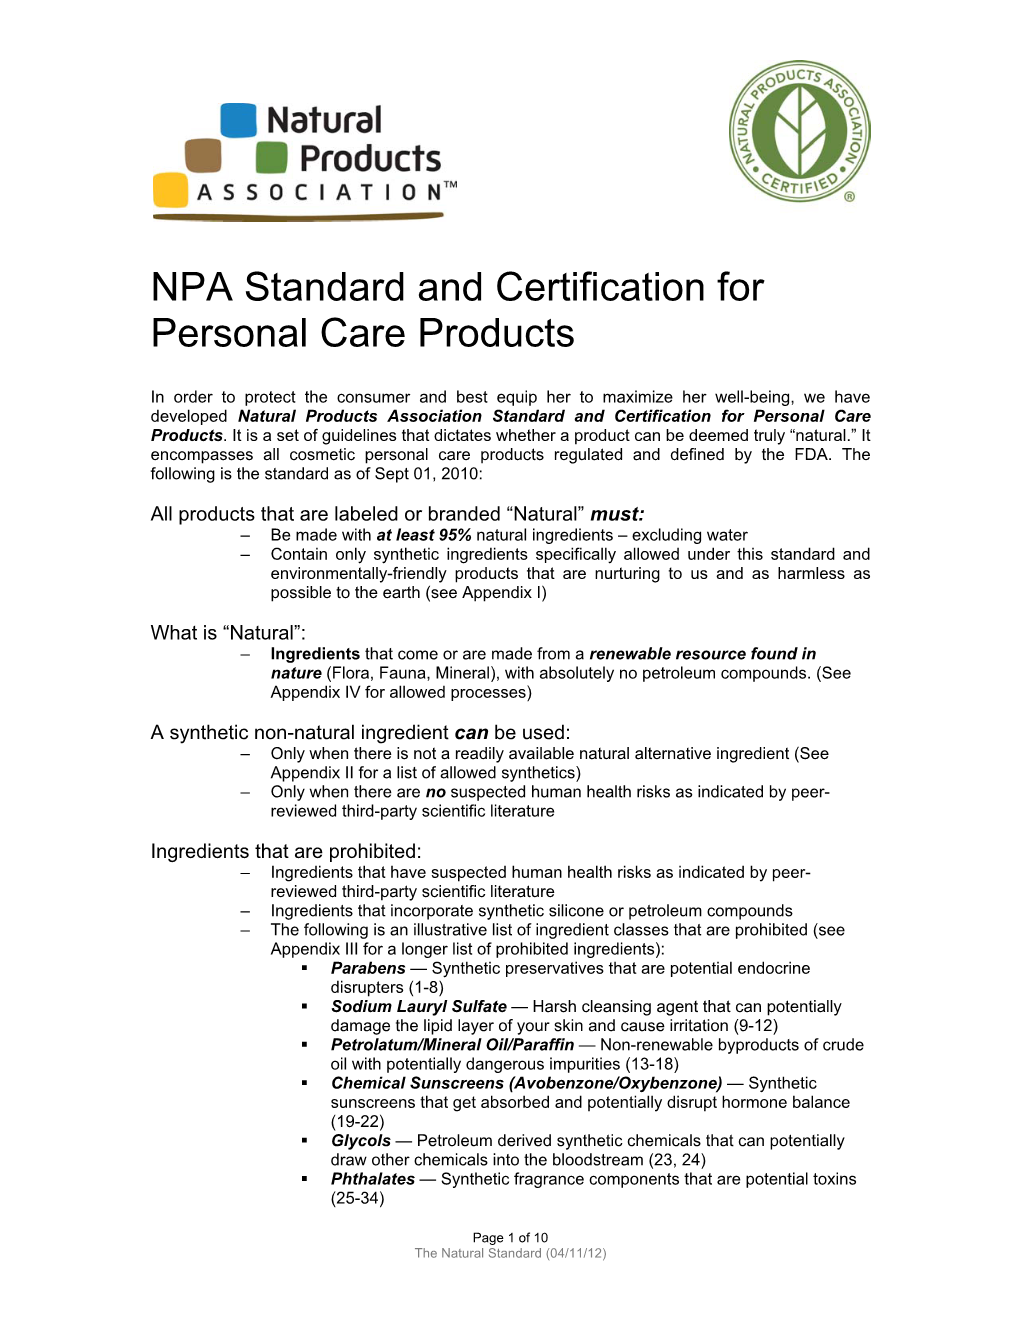 NPA Standard and Certification for Personal Care Products